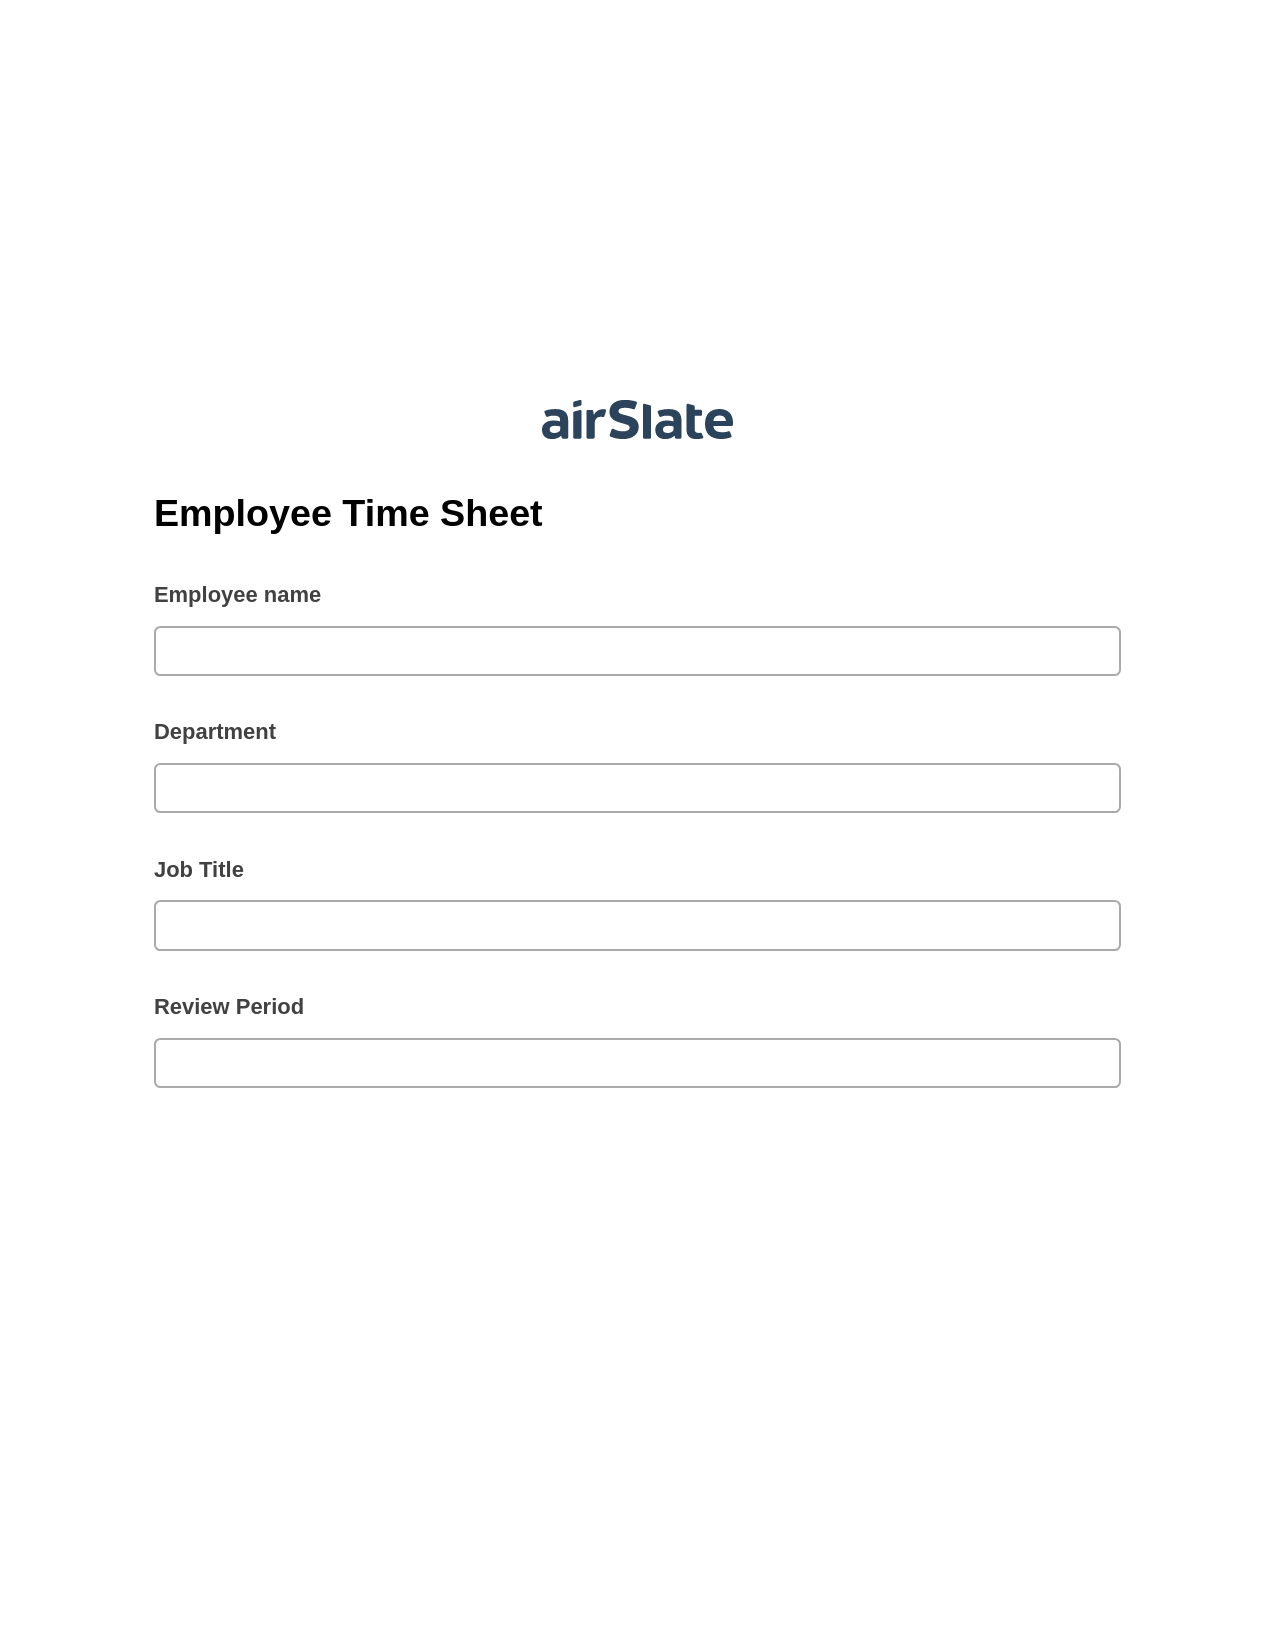 Multirole Employee Time Sheet Pre-fill Dropdowns from Google Sheet Bot, Update Audit Trail Bot, Export to Excel 365 Bot